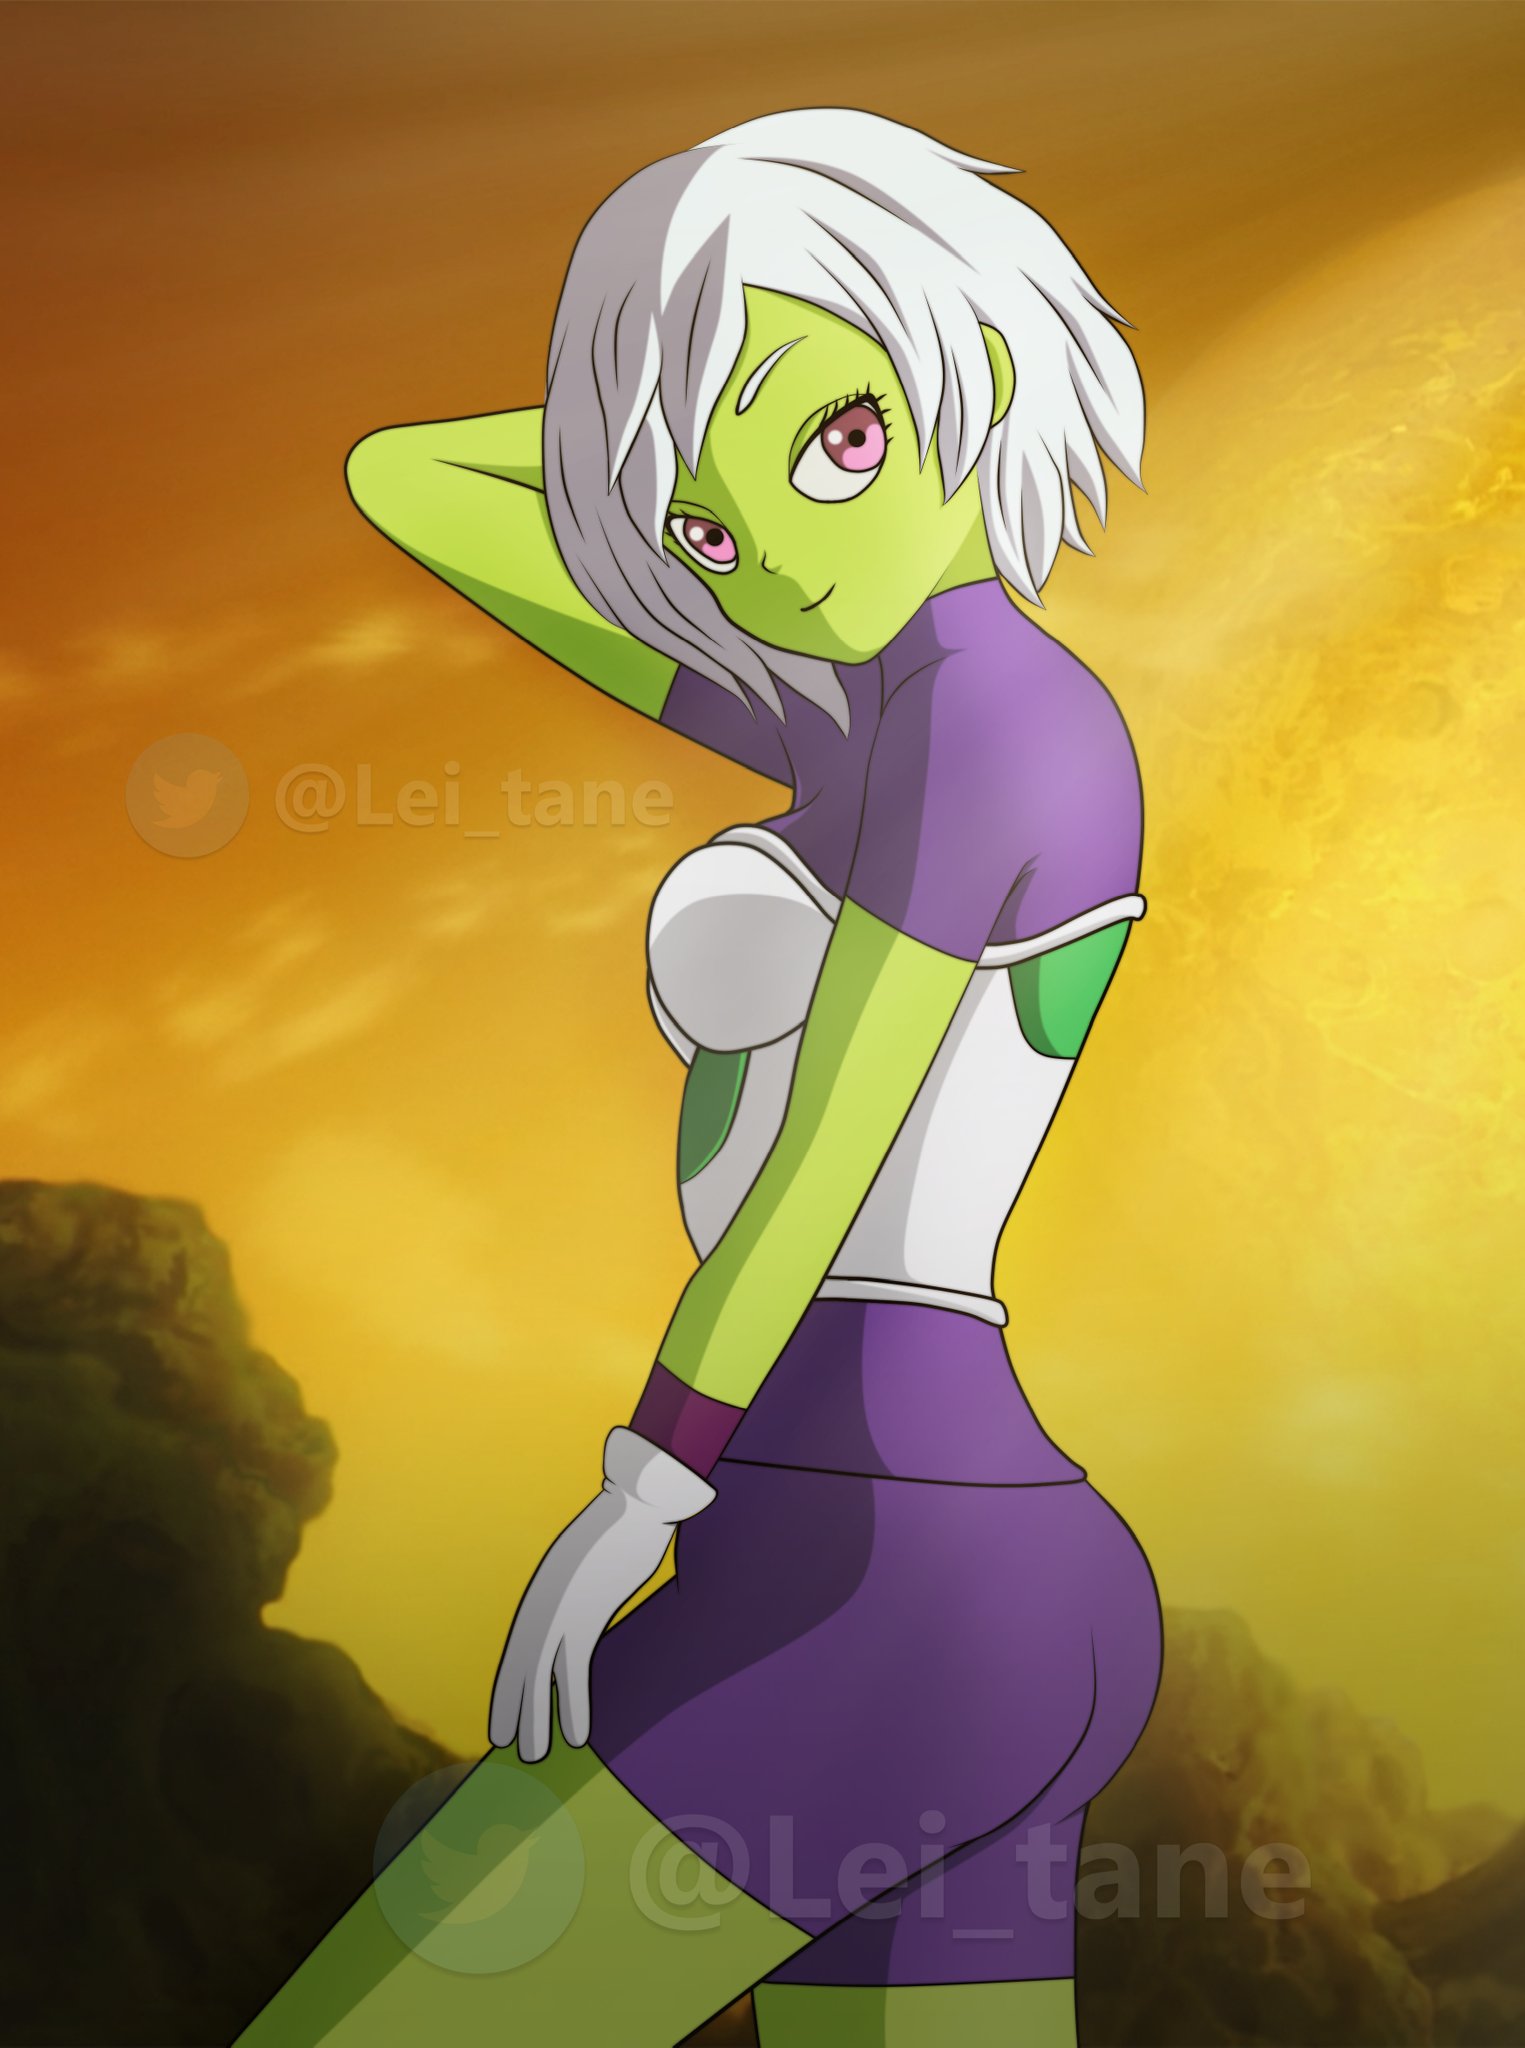 Jonah Alarcon on X: "#Cheelai ready to leave planet Vampa after some  months. HD: https://t.co/E4m1wNjTeT #DragonBallSuper #DBS  https://t.co/T6fLA05hA1" / X